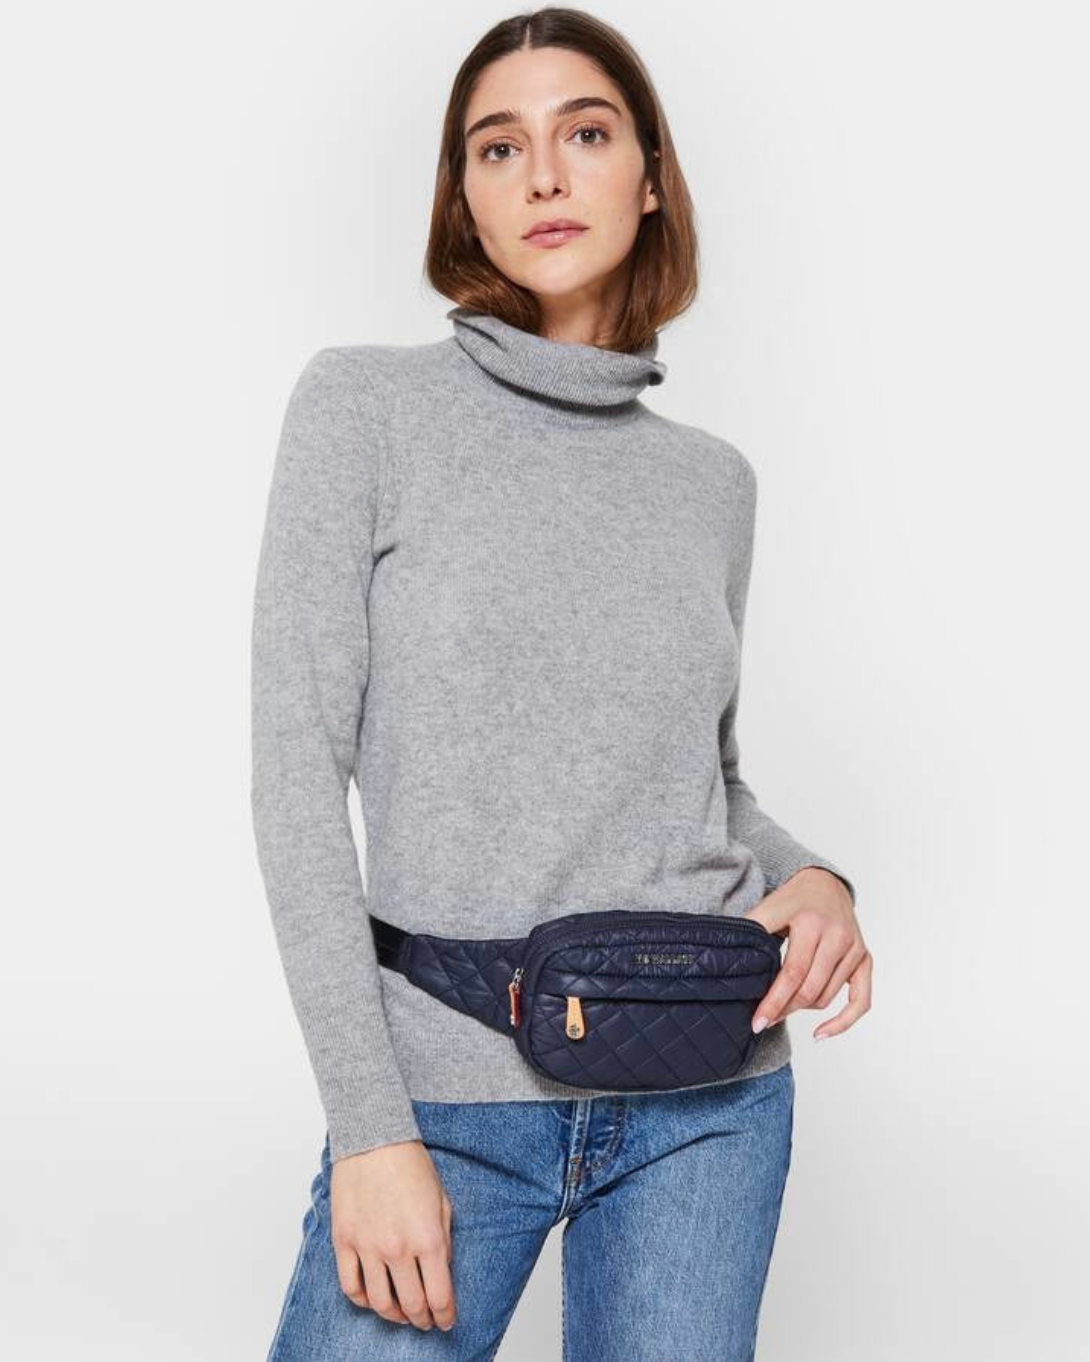 Model wearing a Mz Wallace Metro Belt bag also used as a sling bag in color dawn wearing blue jeans and a gray turtle neck on a white background 